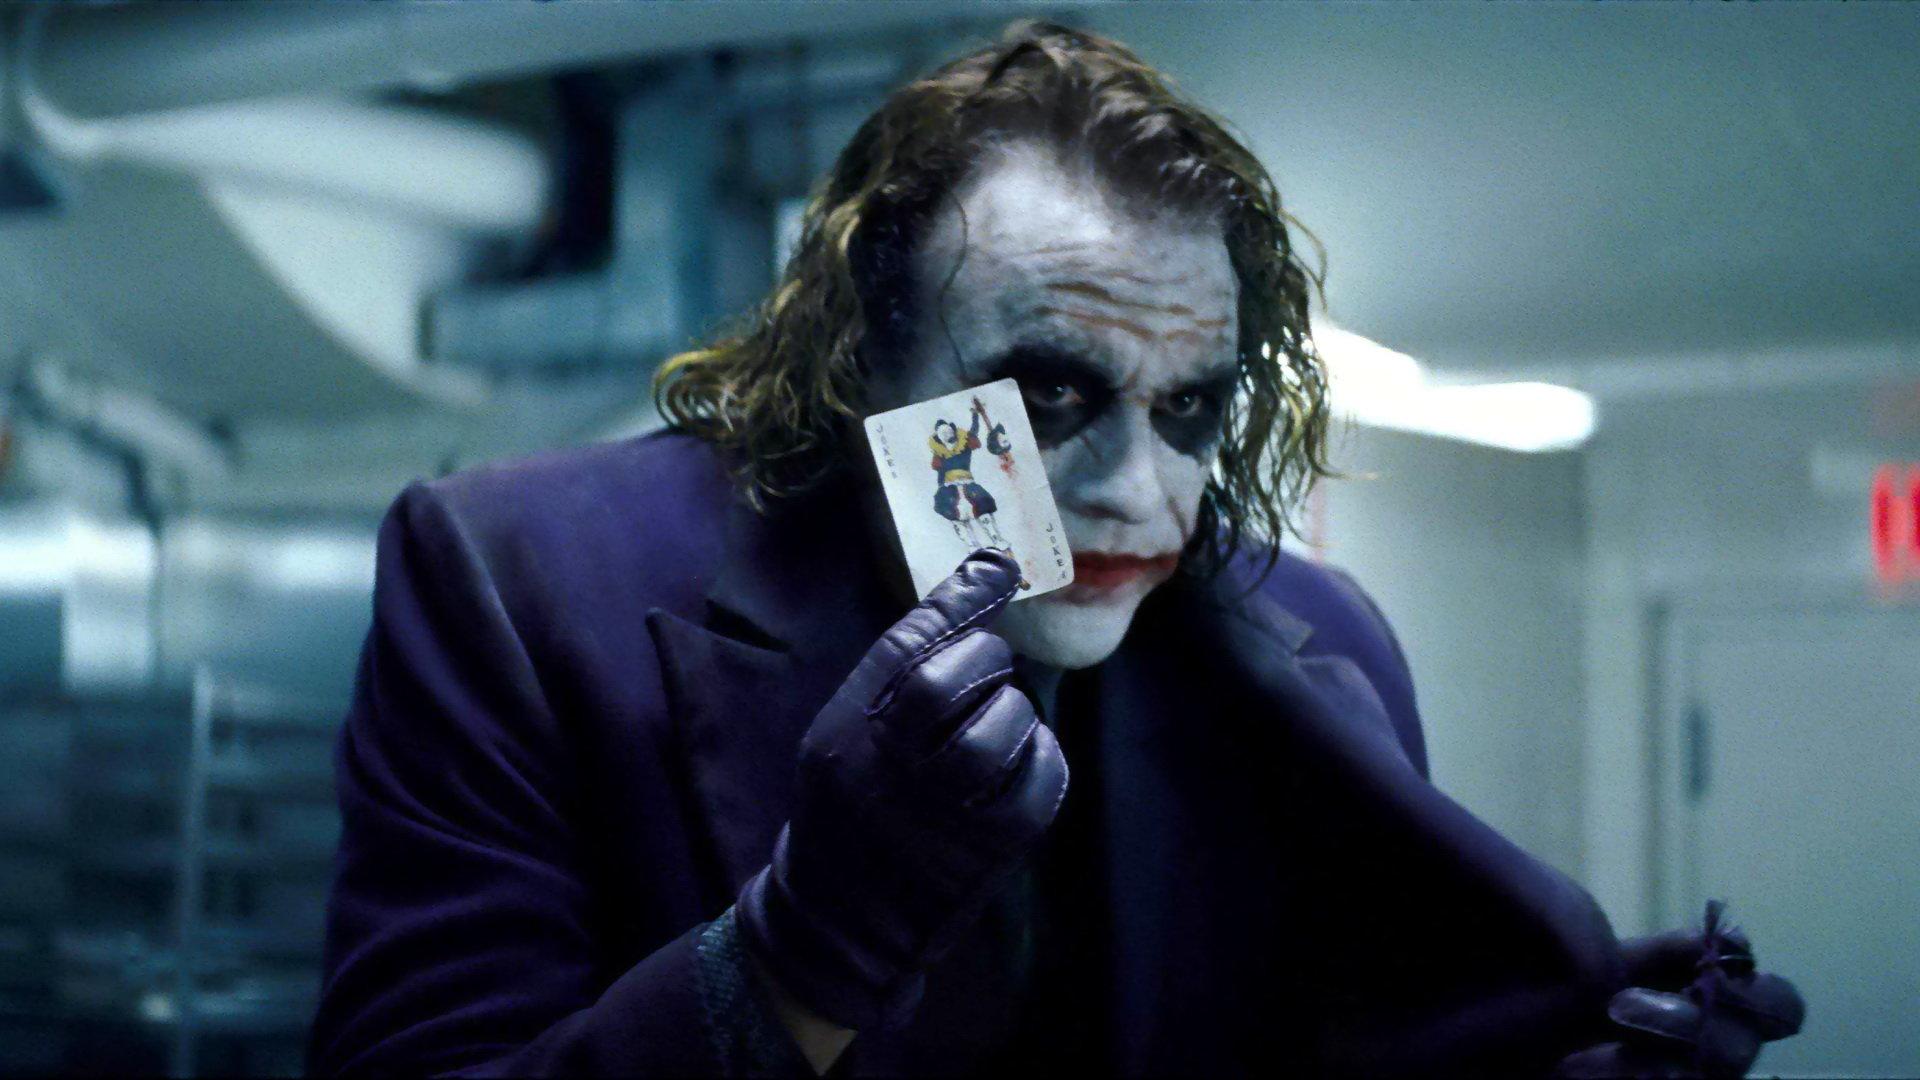 The Joker holding his iconic playing card with a sinister smile.